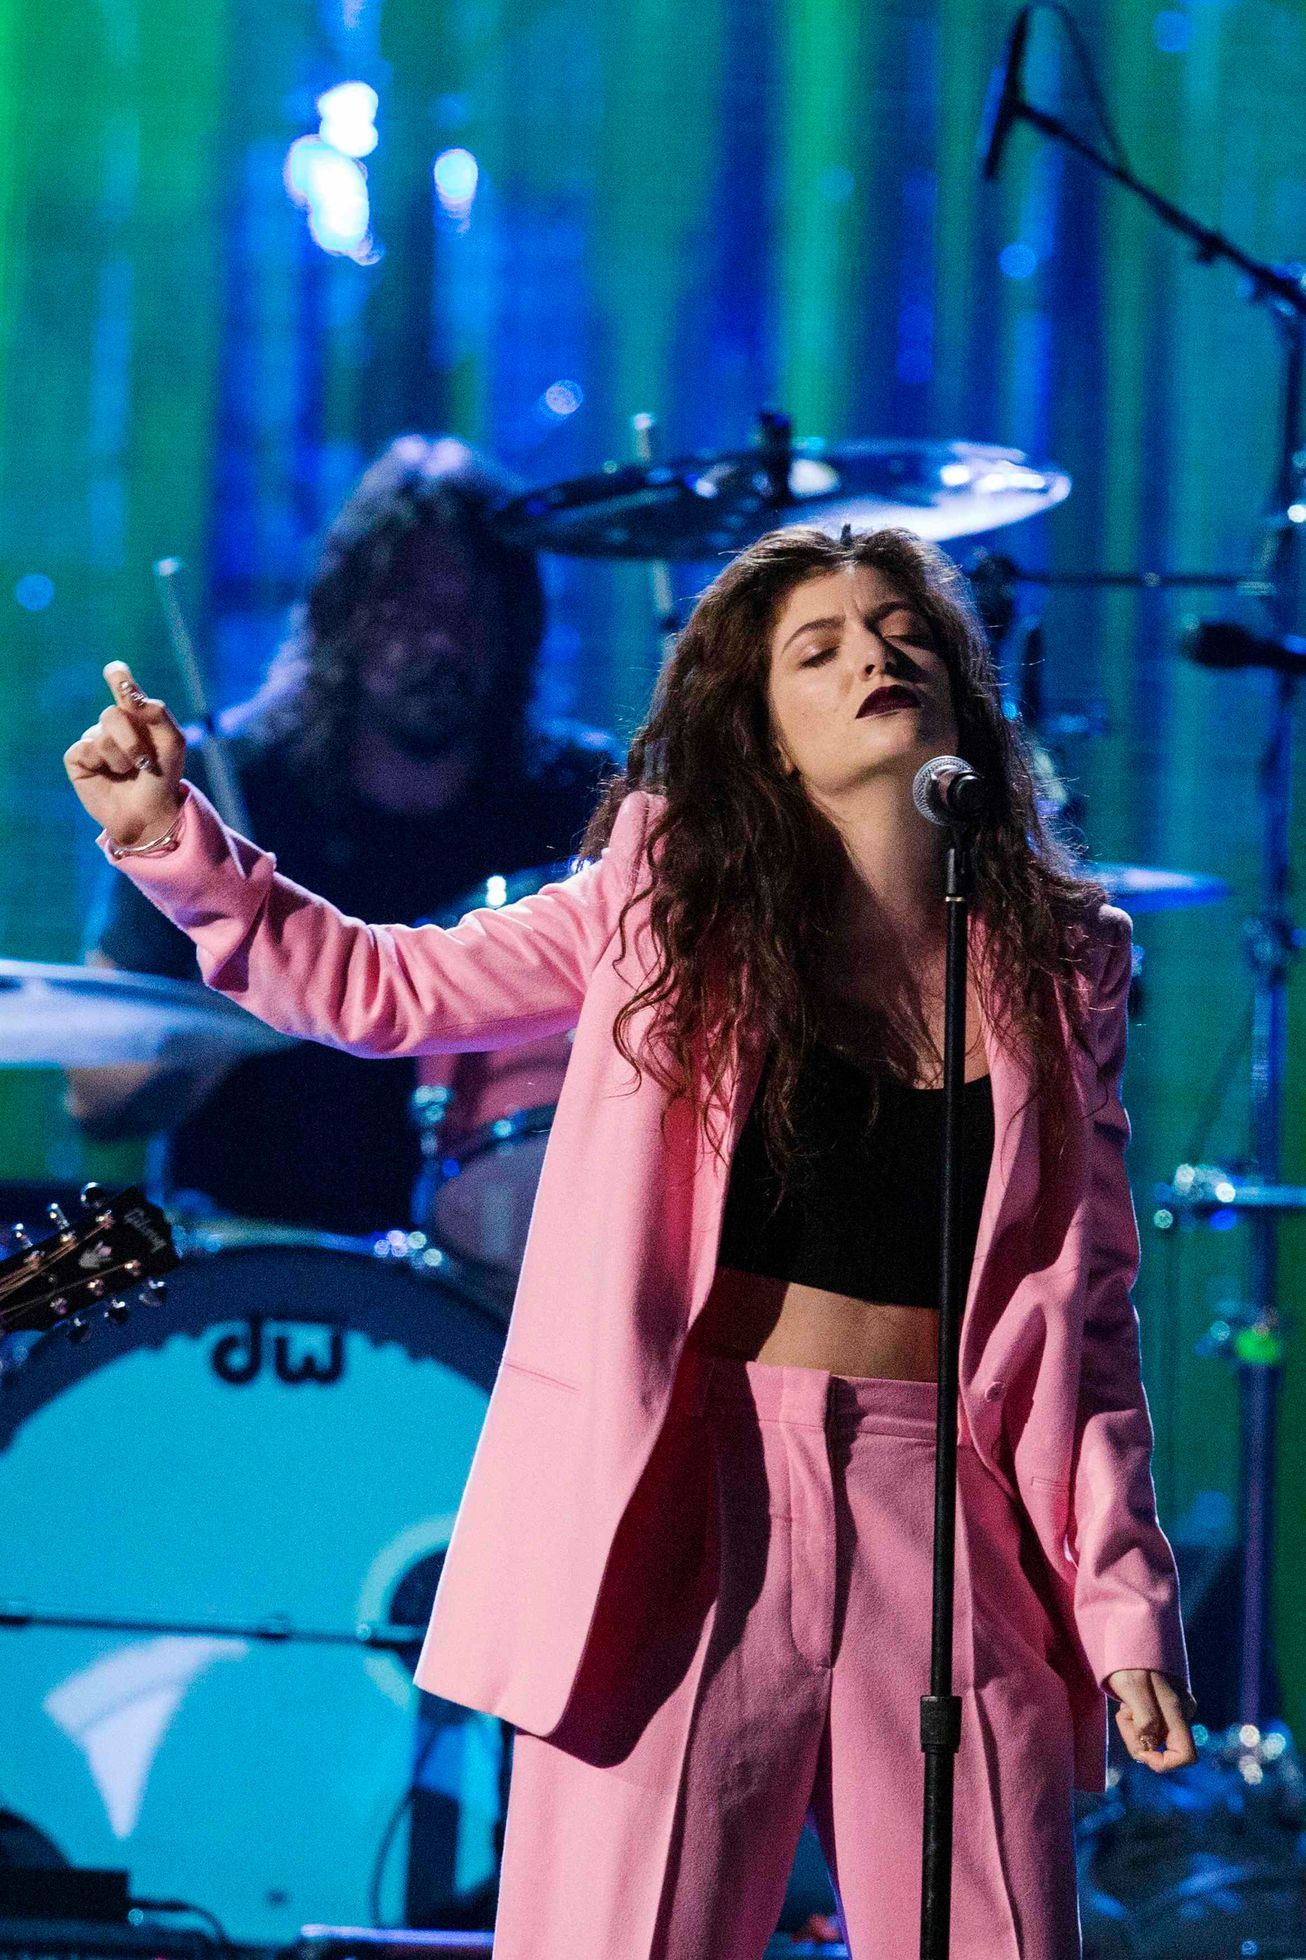 Singer Lorde performs with remaining members of band Nirvana after it was inducted during 29th annual Rock and Roll Hall of Fame Induction Ceremony in Brooklyn, New York